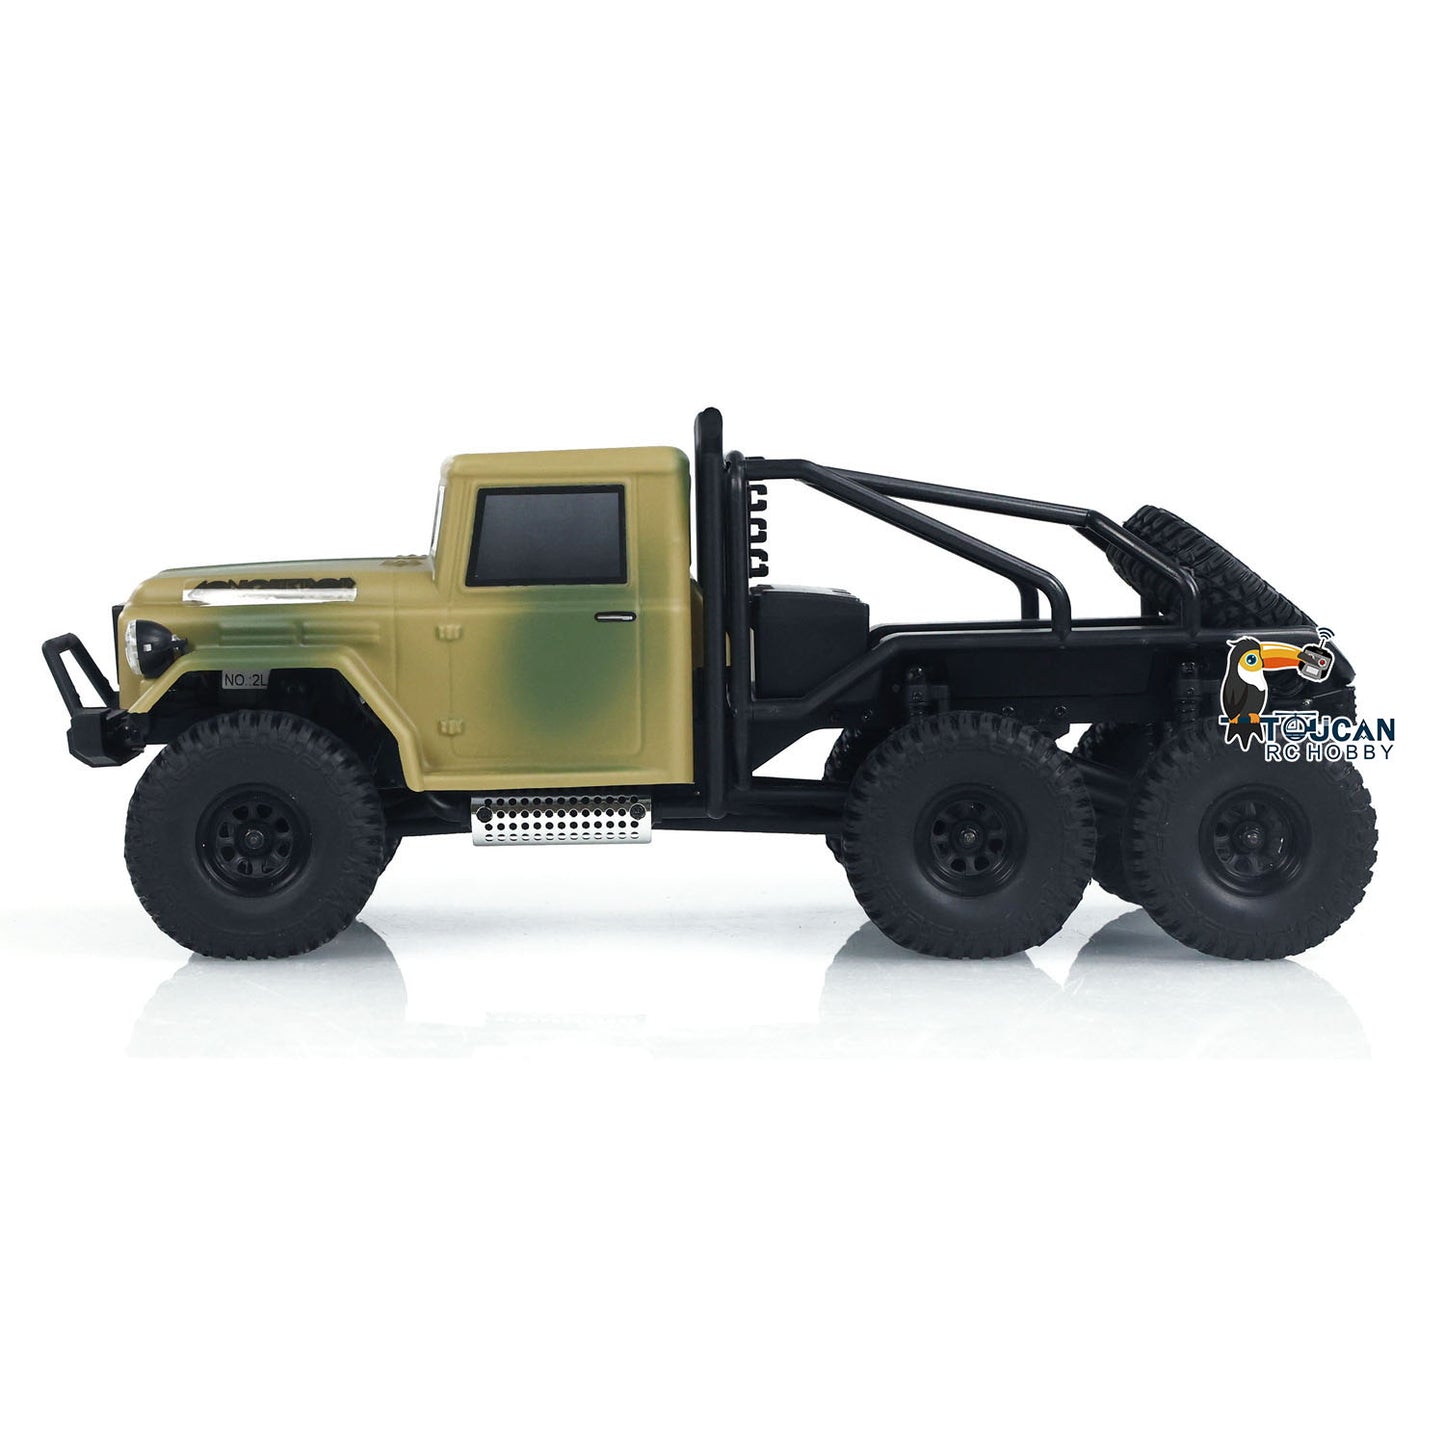 1/18 Hobby Plus 6x6 RC Rock Crawler Car Remote Controlled Electric Off-road Vehicle Simulation Toys Hobby Model Gifts